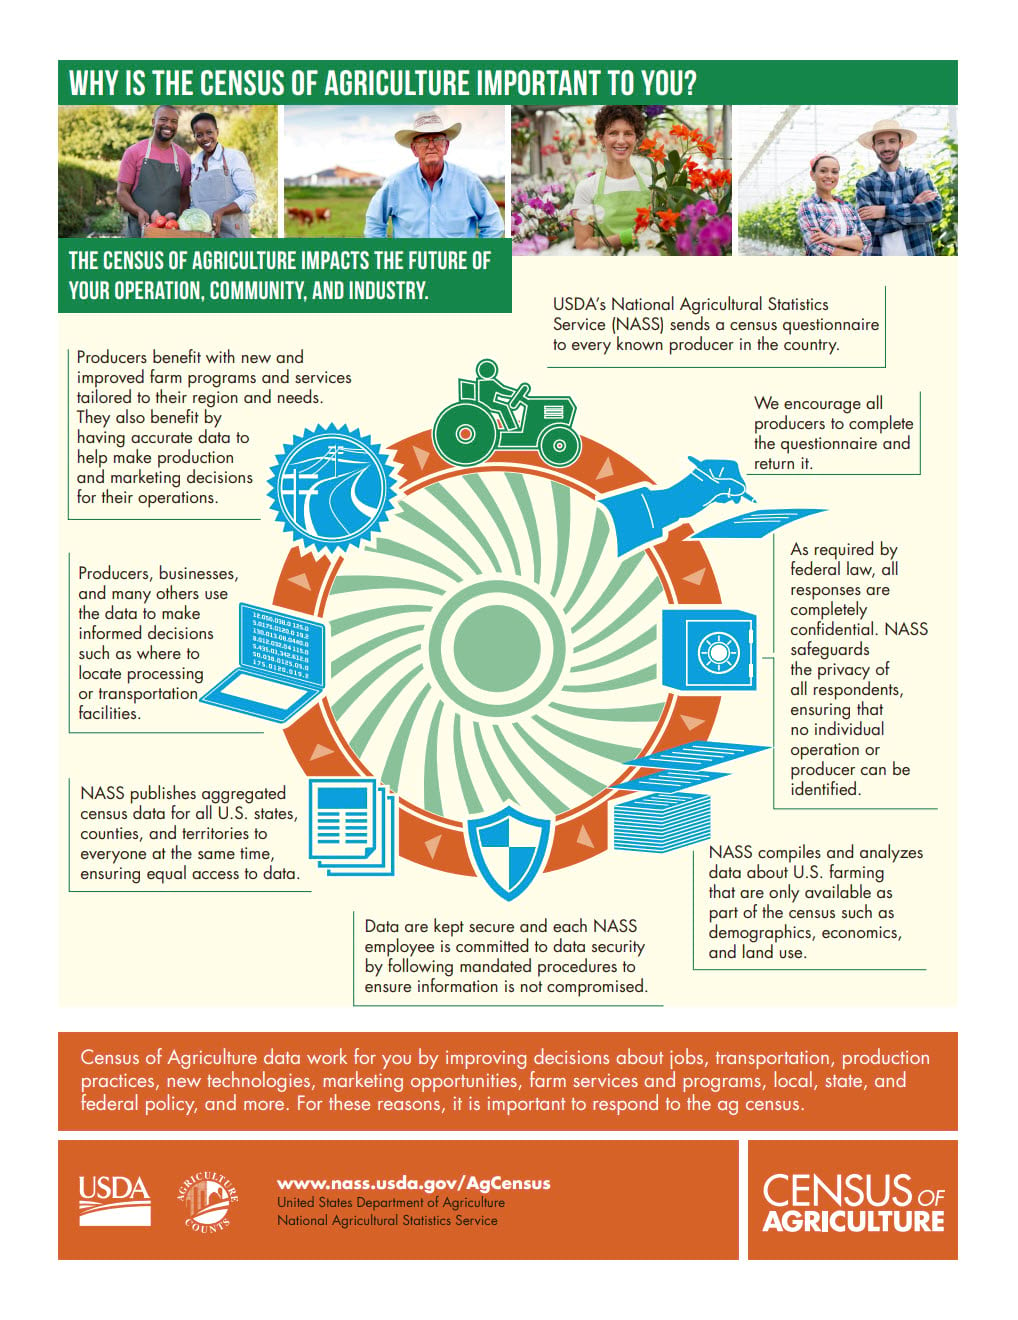 Inforgraphic from USDA showing why the Census of Agriculture is Important to You.